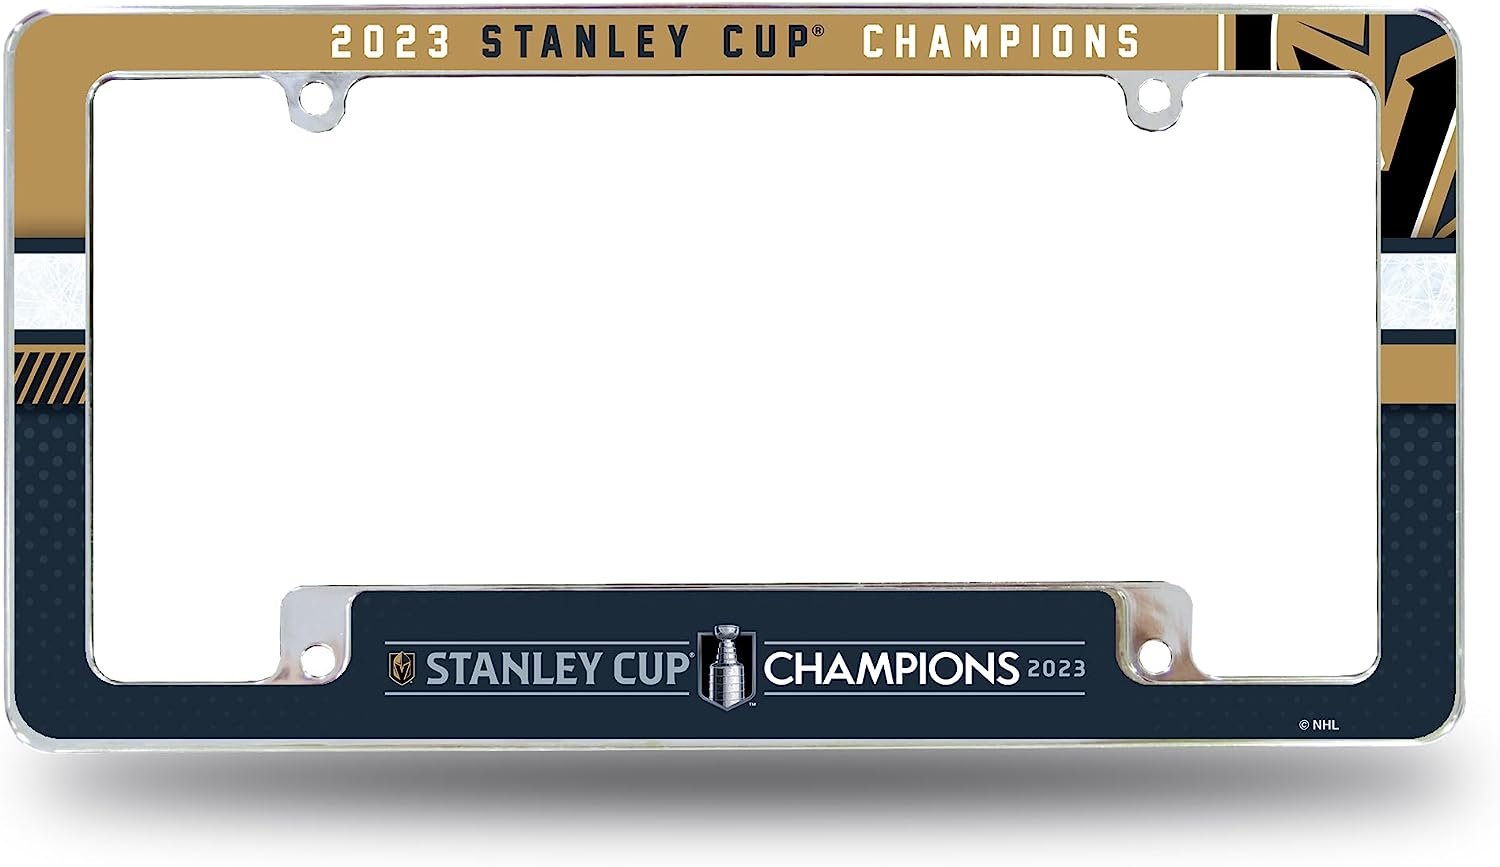 Vegas Golden Knights 2023 Stanley Cup Champions Premium Metal License Plate Frame Tag Cover, All Over Design, 6x12 Inch